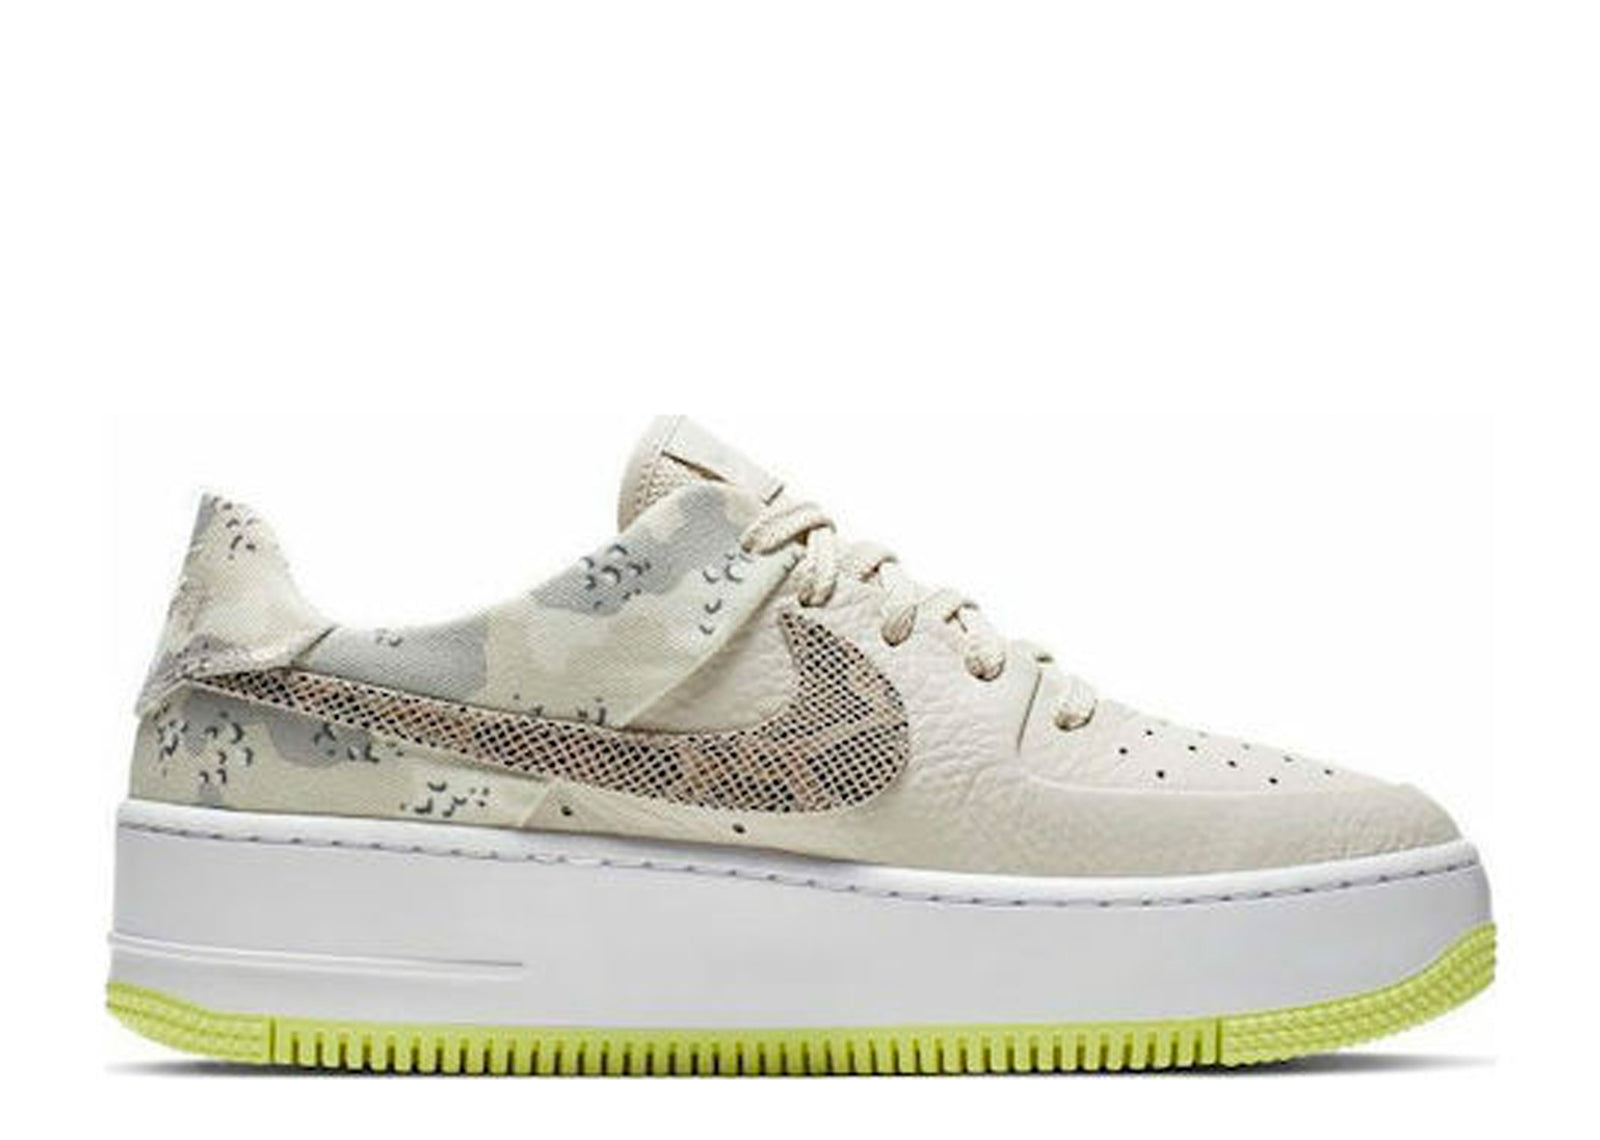 Second Chance - Nike Air Force 1 Sage Low Orewood Camo - 42 | NEW